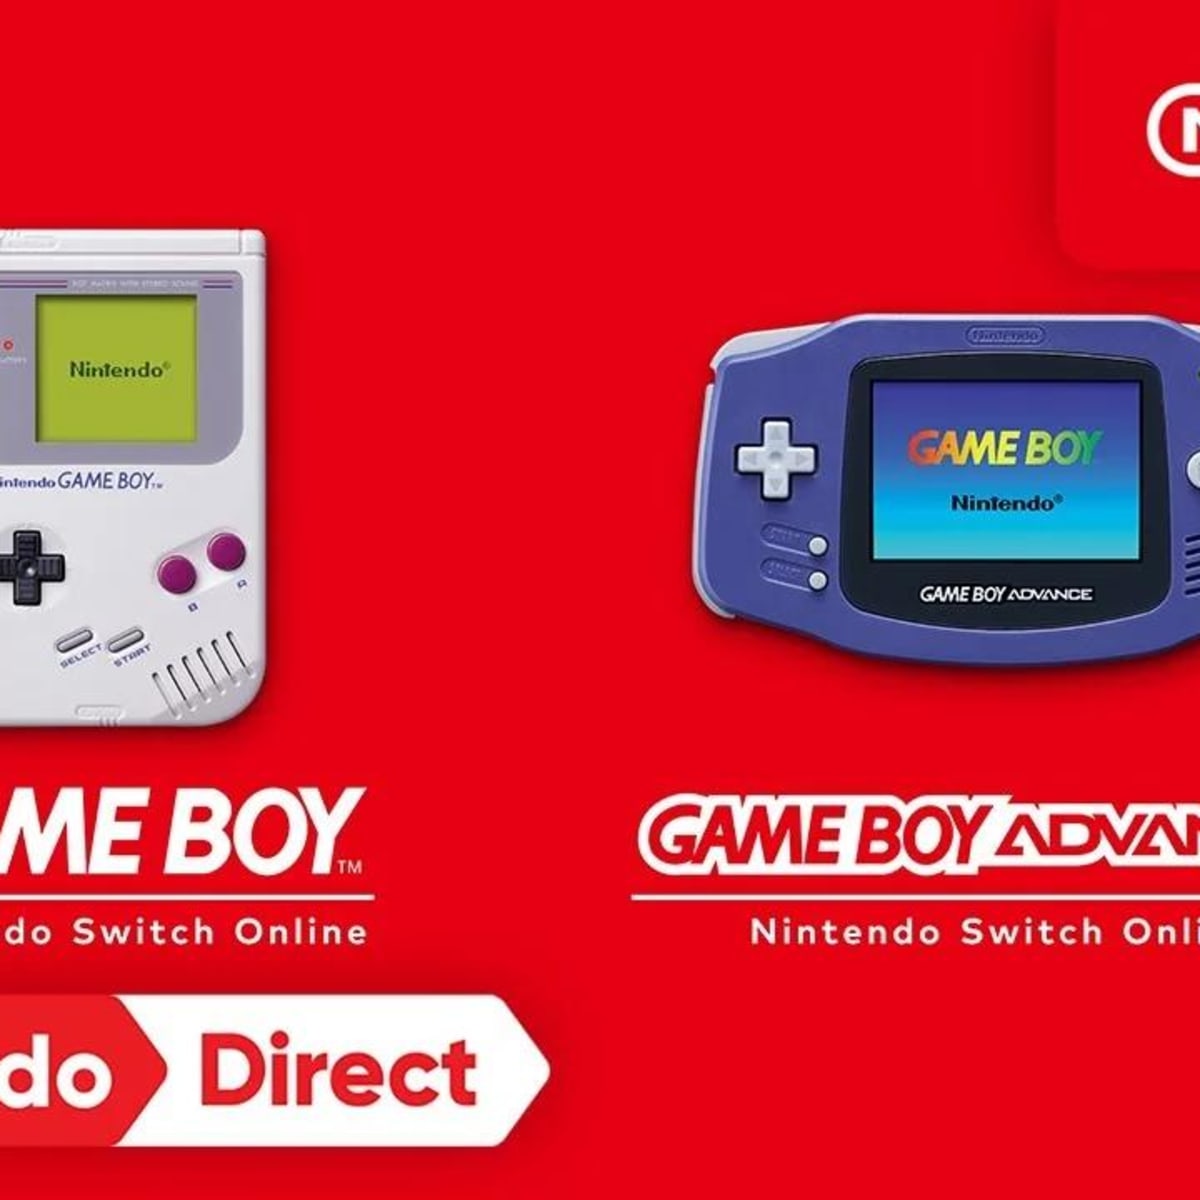 Gameboy and GBA games are finally on Nintendo Switch Online — But